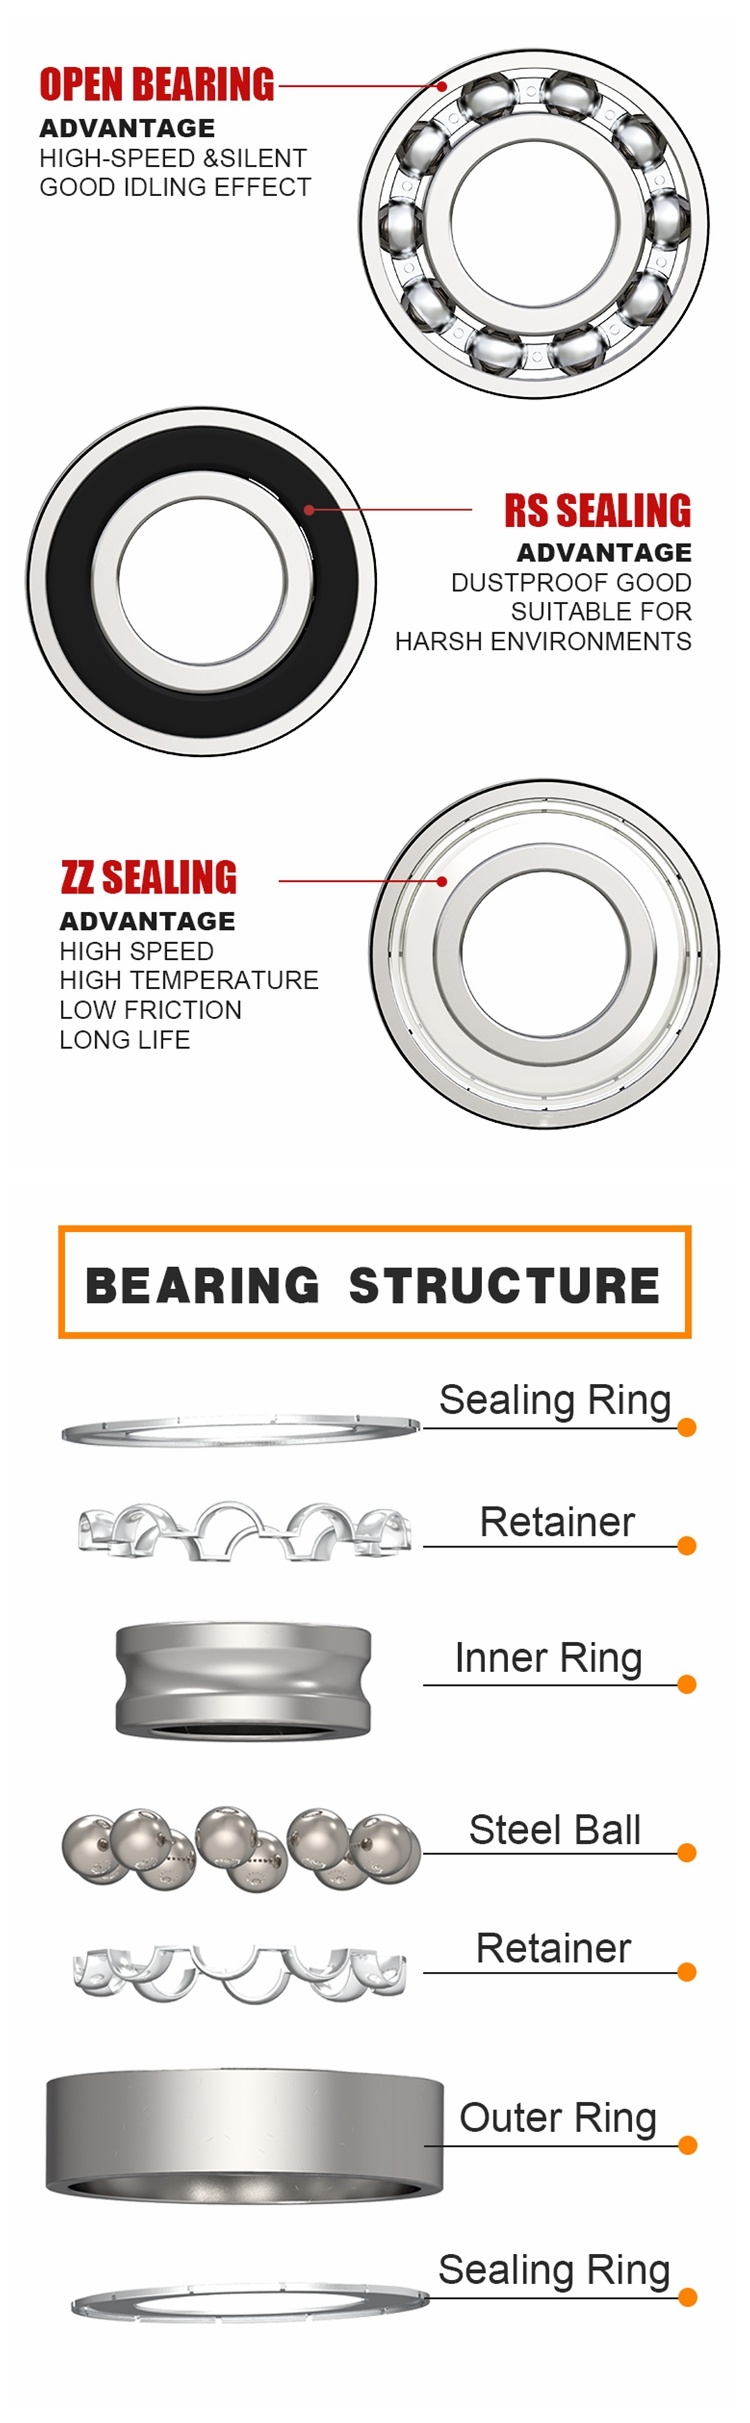 Motor Clearance Agriculture Bearing Z3 16034 Zz Ball Bearings